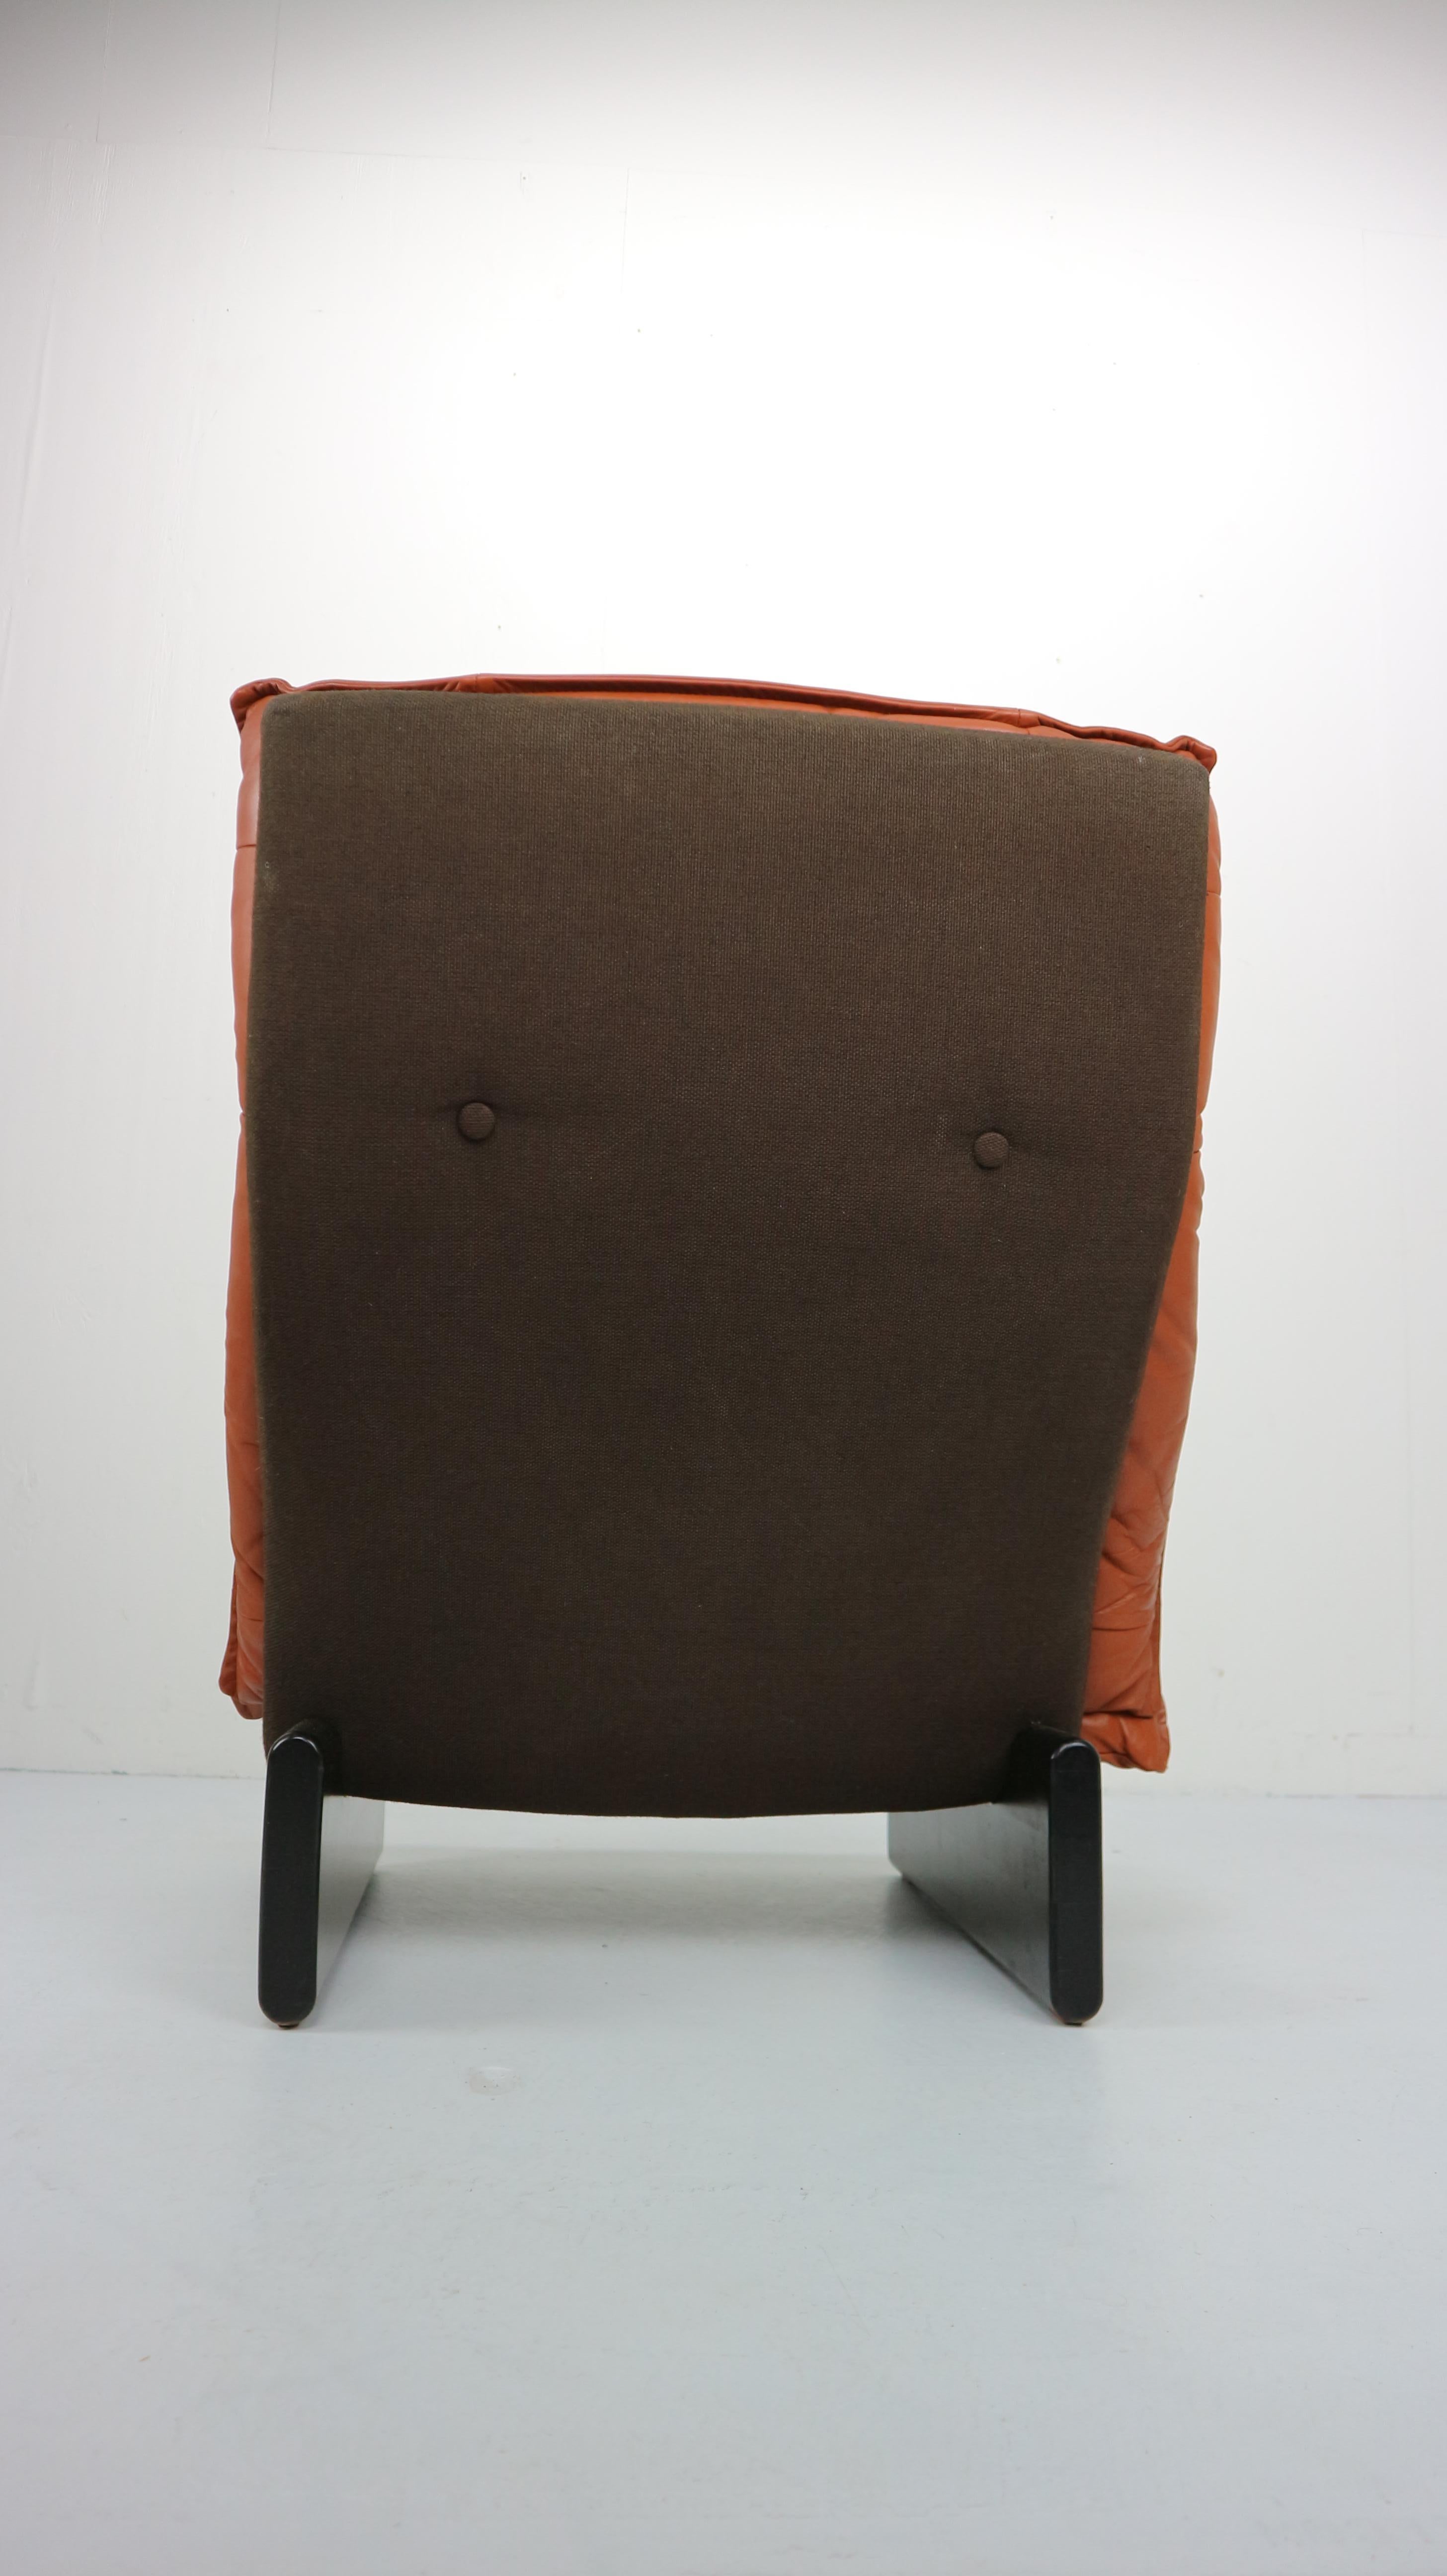 Cognac Leather and Wood Lounge Chair, Dutch Modern Design, 1970s 3